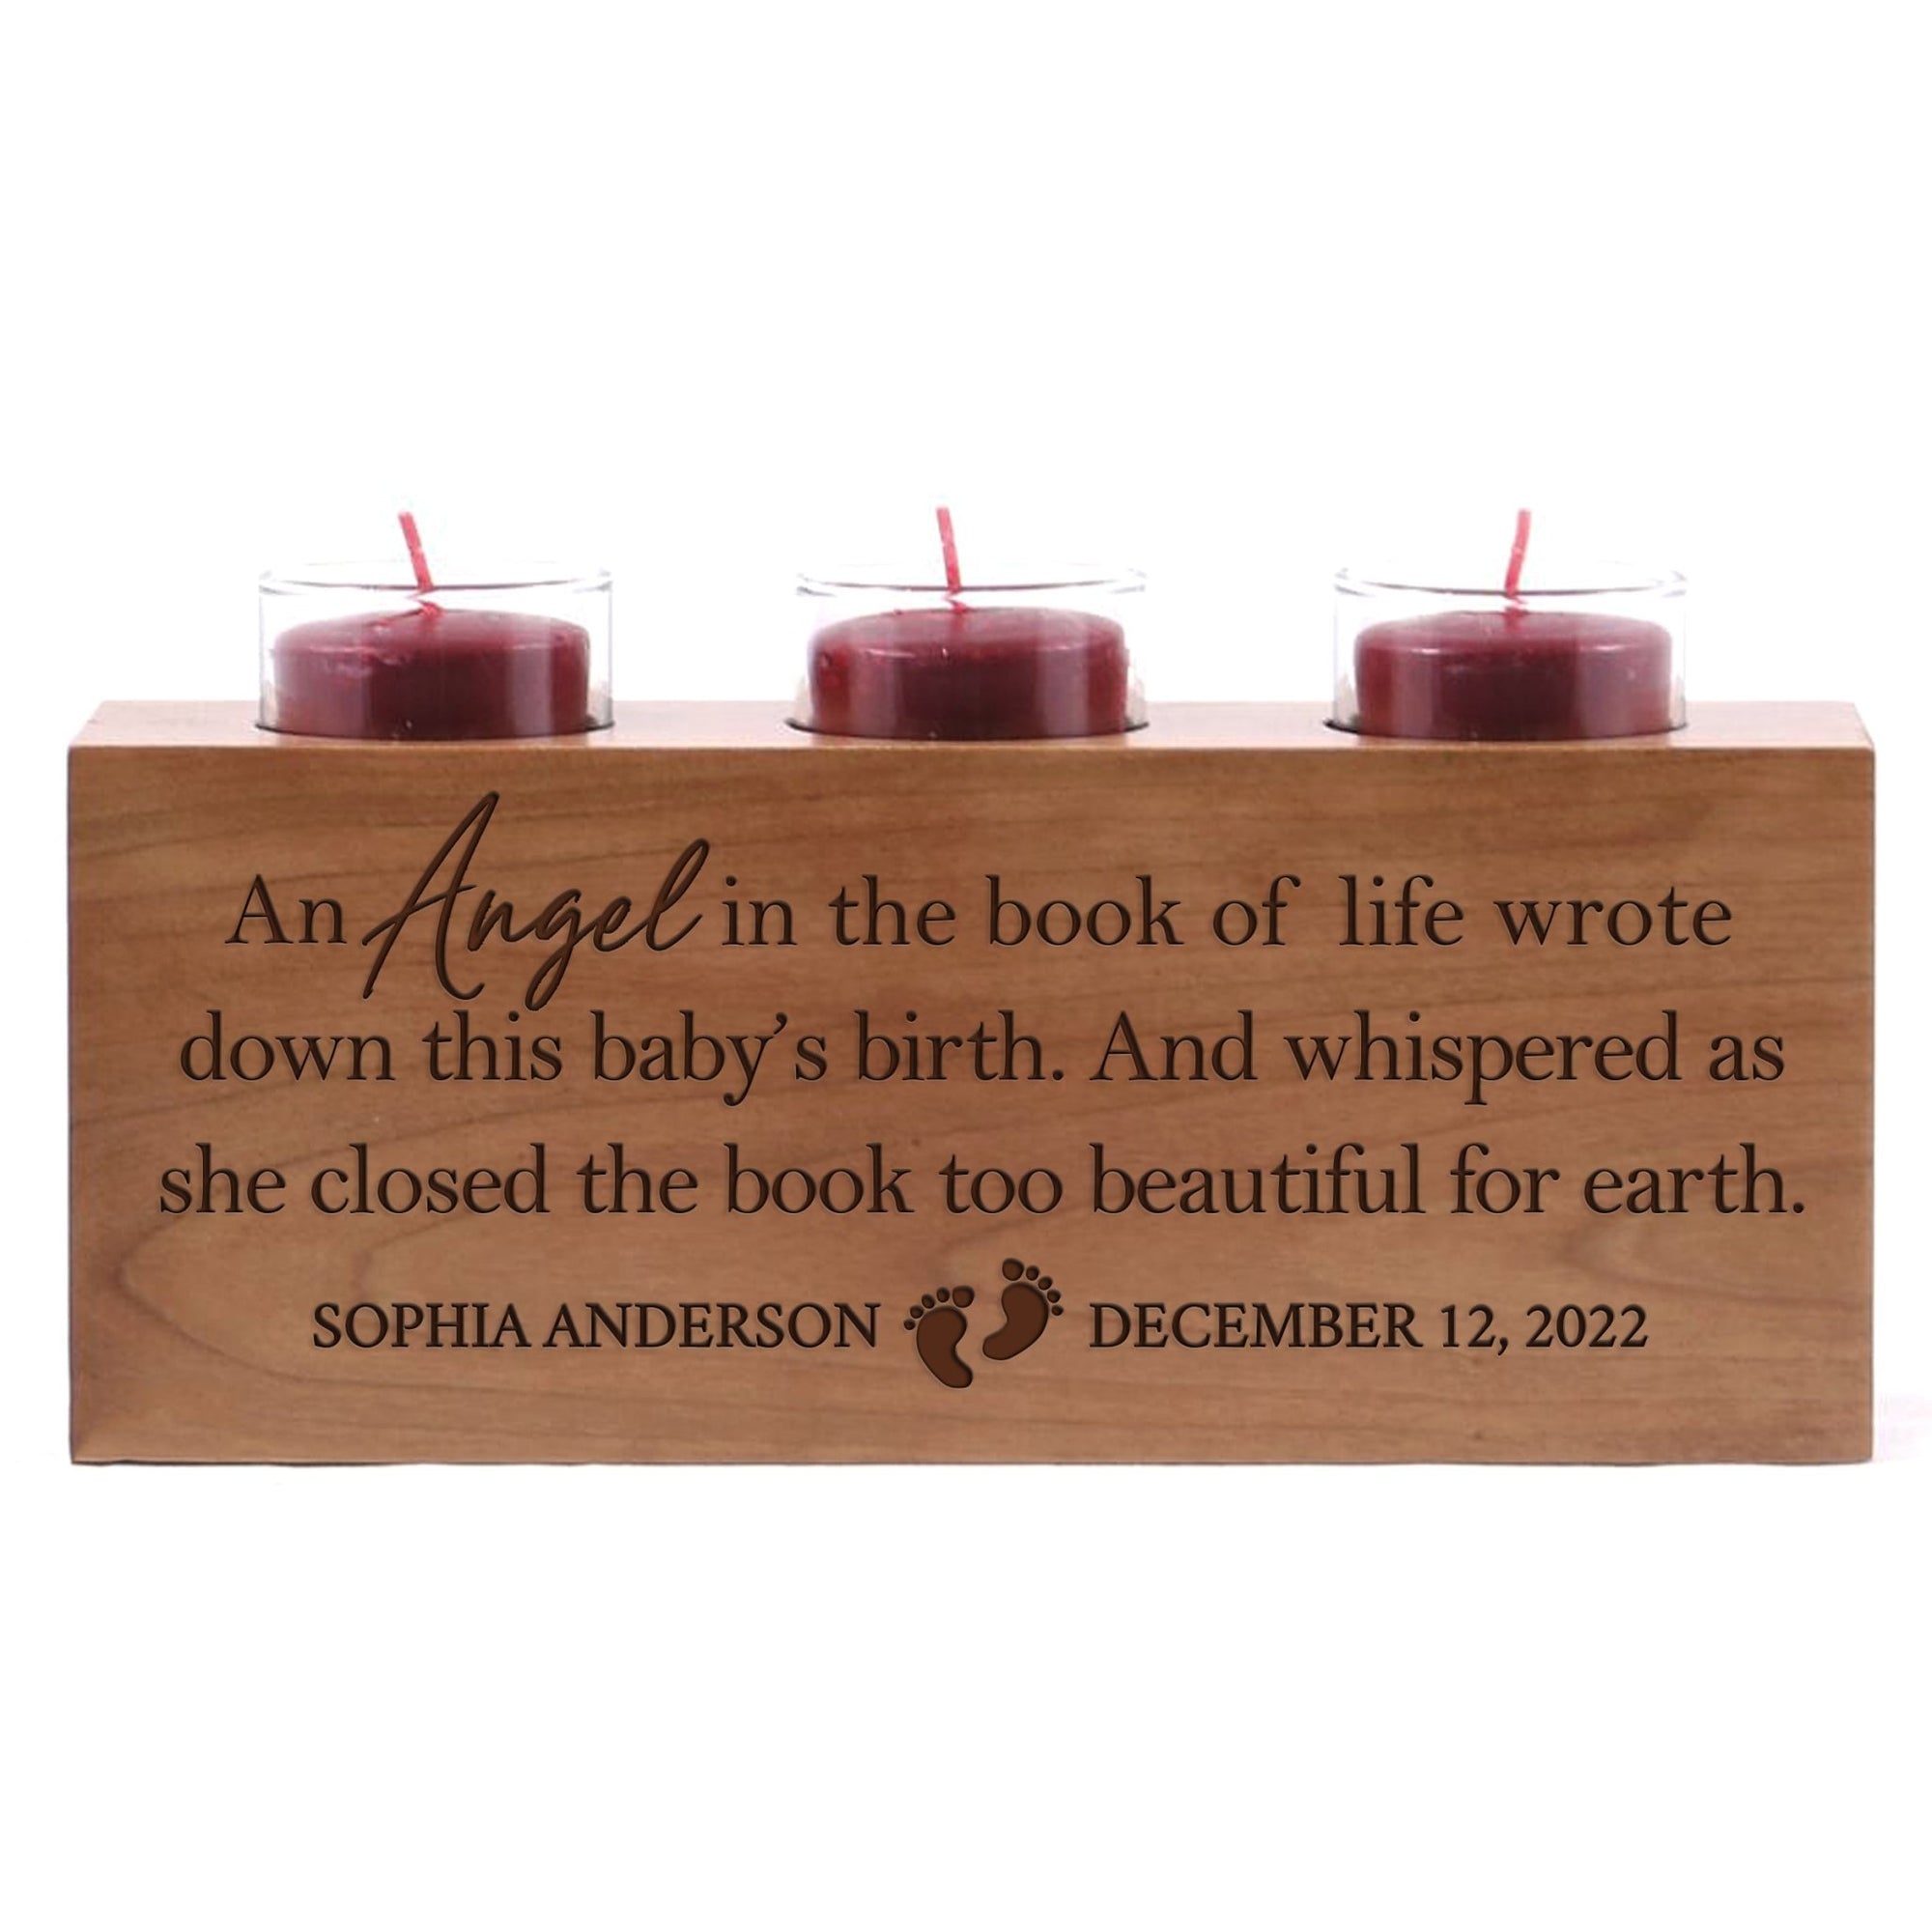 Custom Engraved Memorial Tealight Glass Votives Candle Holder - An Angel In The Book of Life - LifeSong Milestones